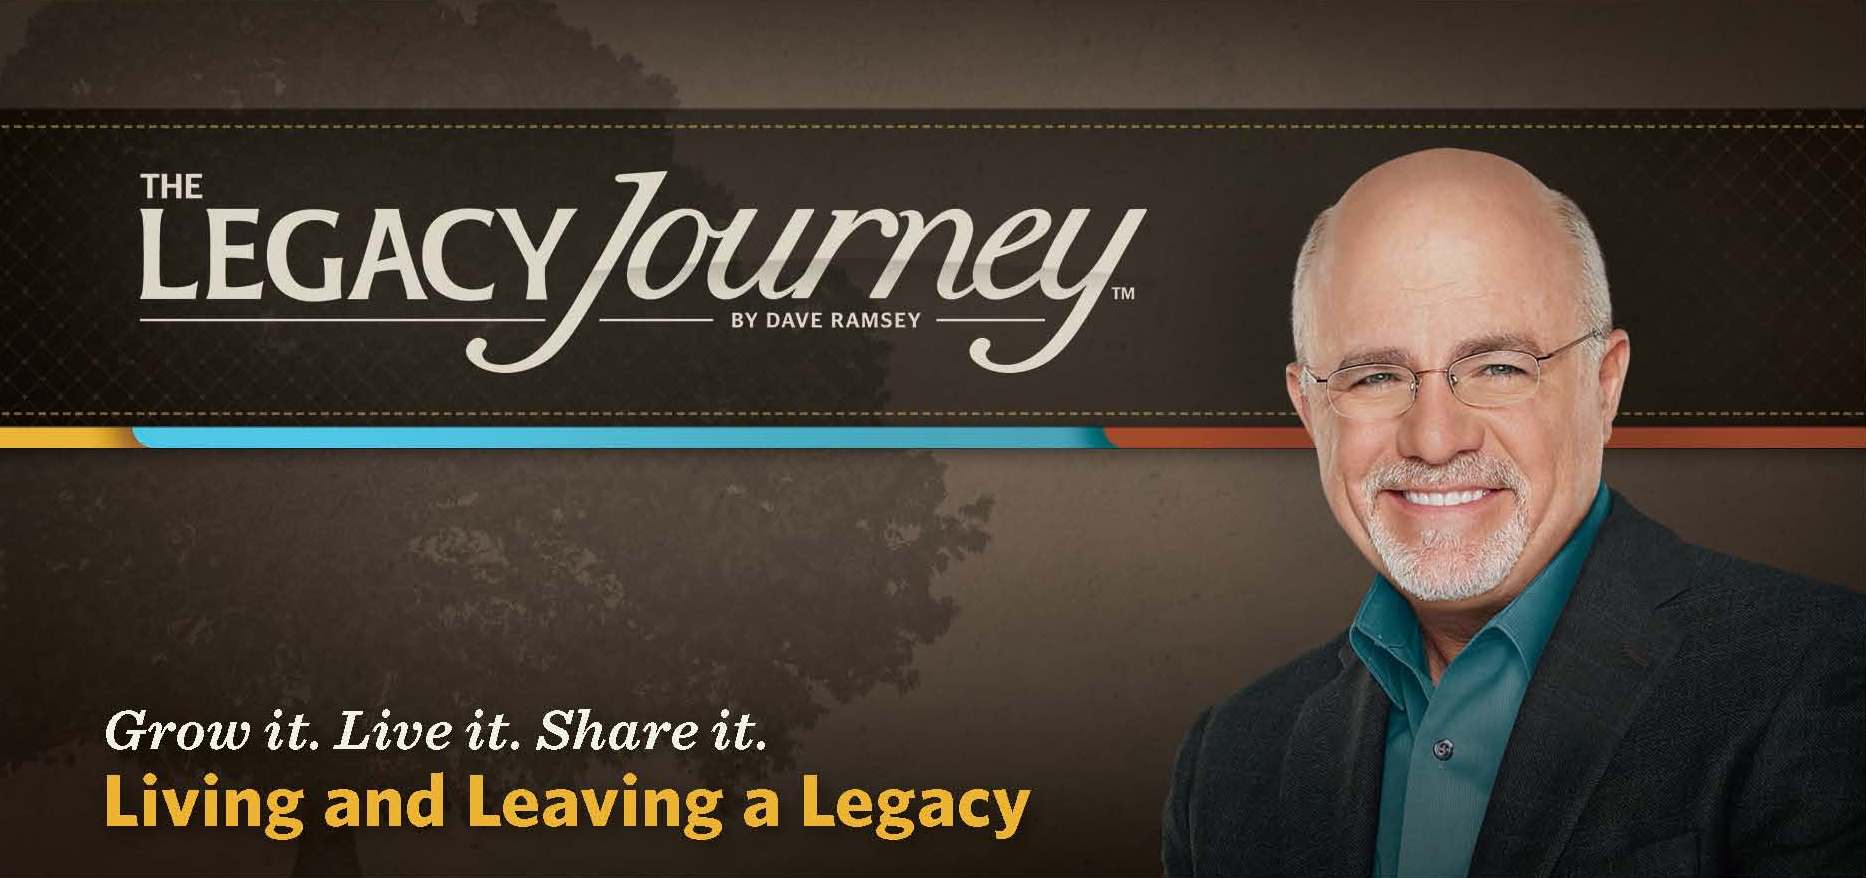 the legacy journey dave ramsey pdf